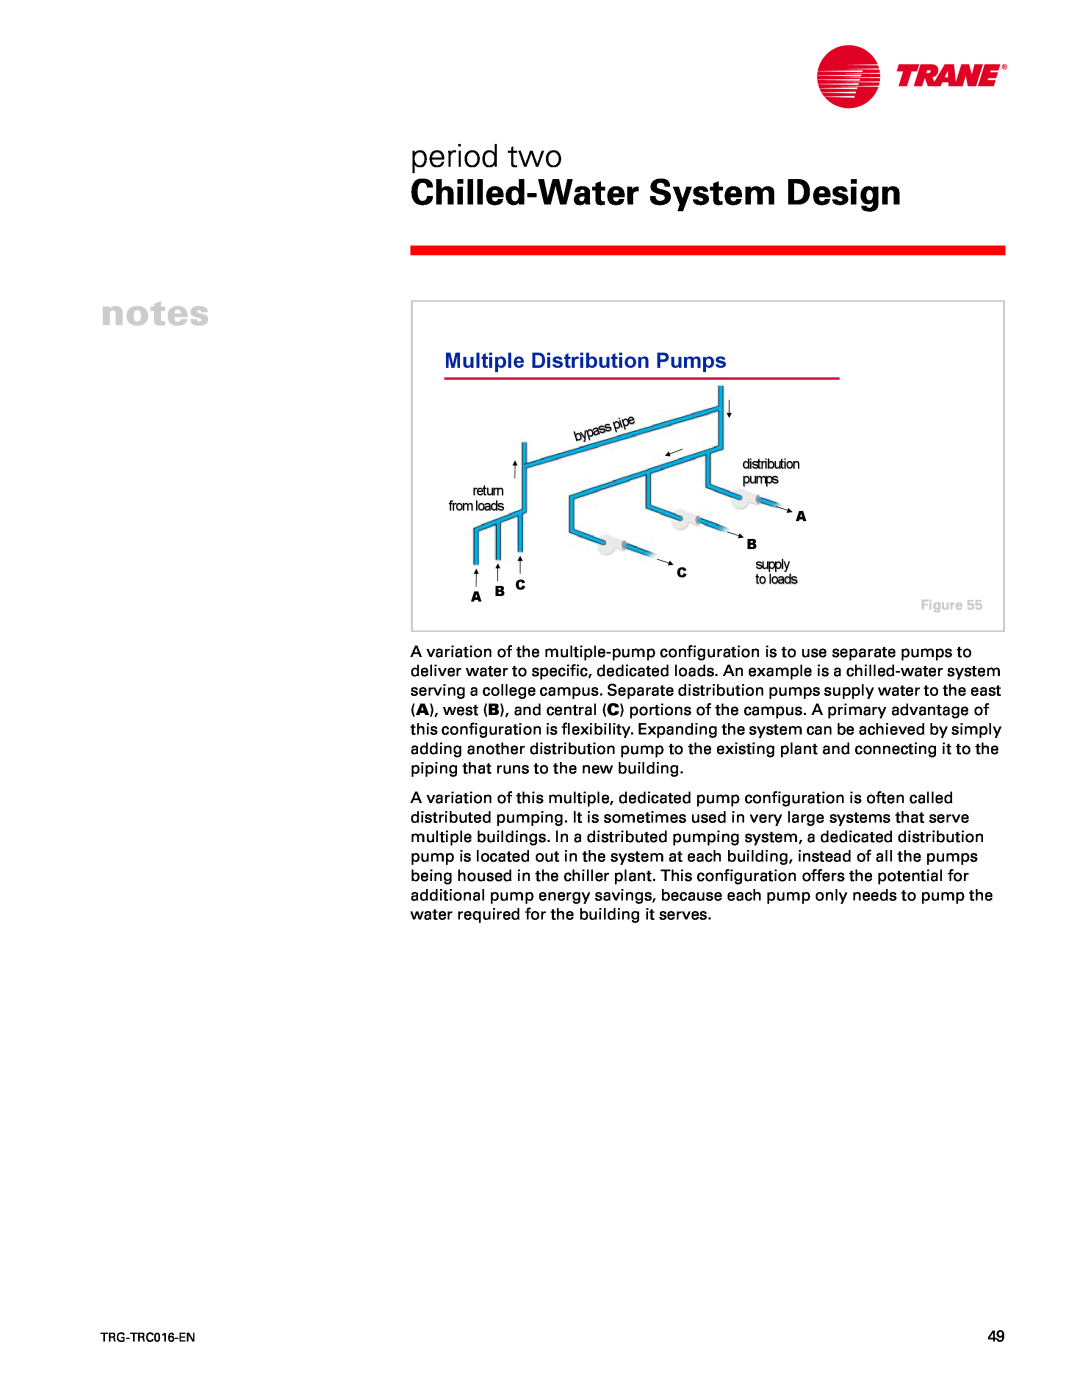 Trane TRG-TRC016-EN manual notes, Chilled-WaterSystem Design, period two, Multiple Distribution Pumps 